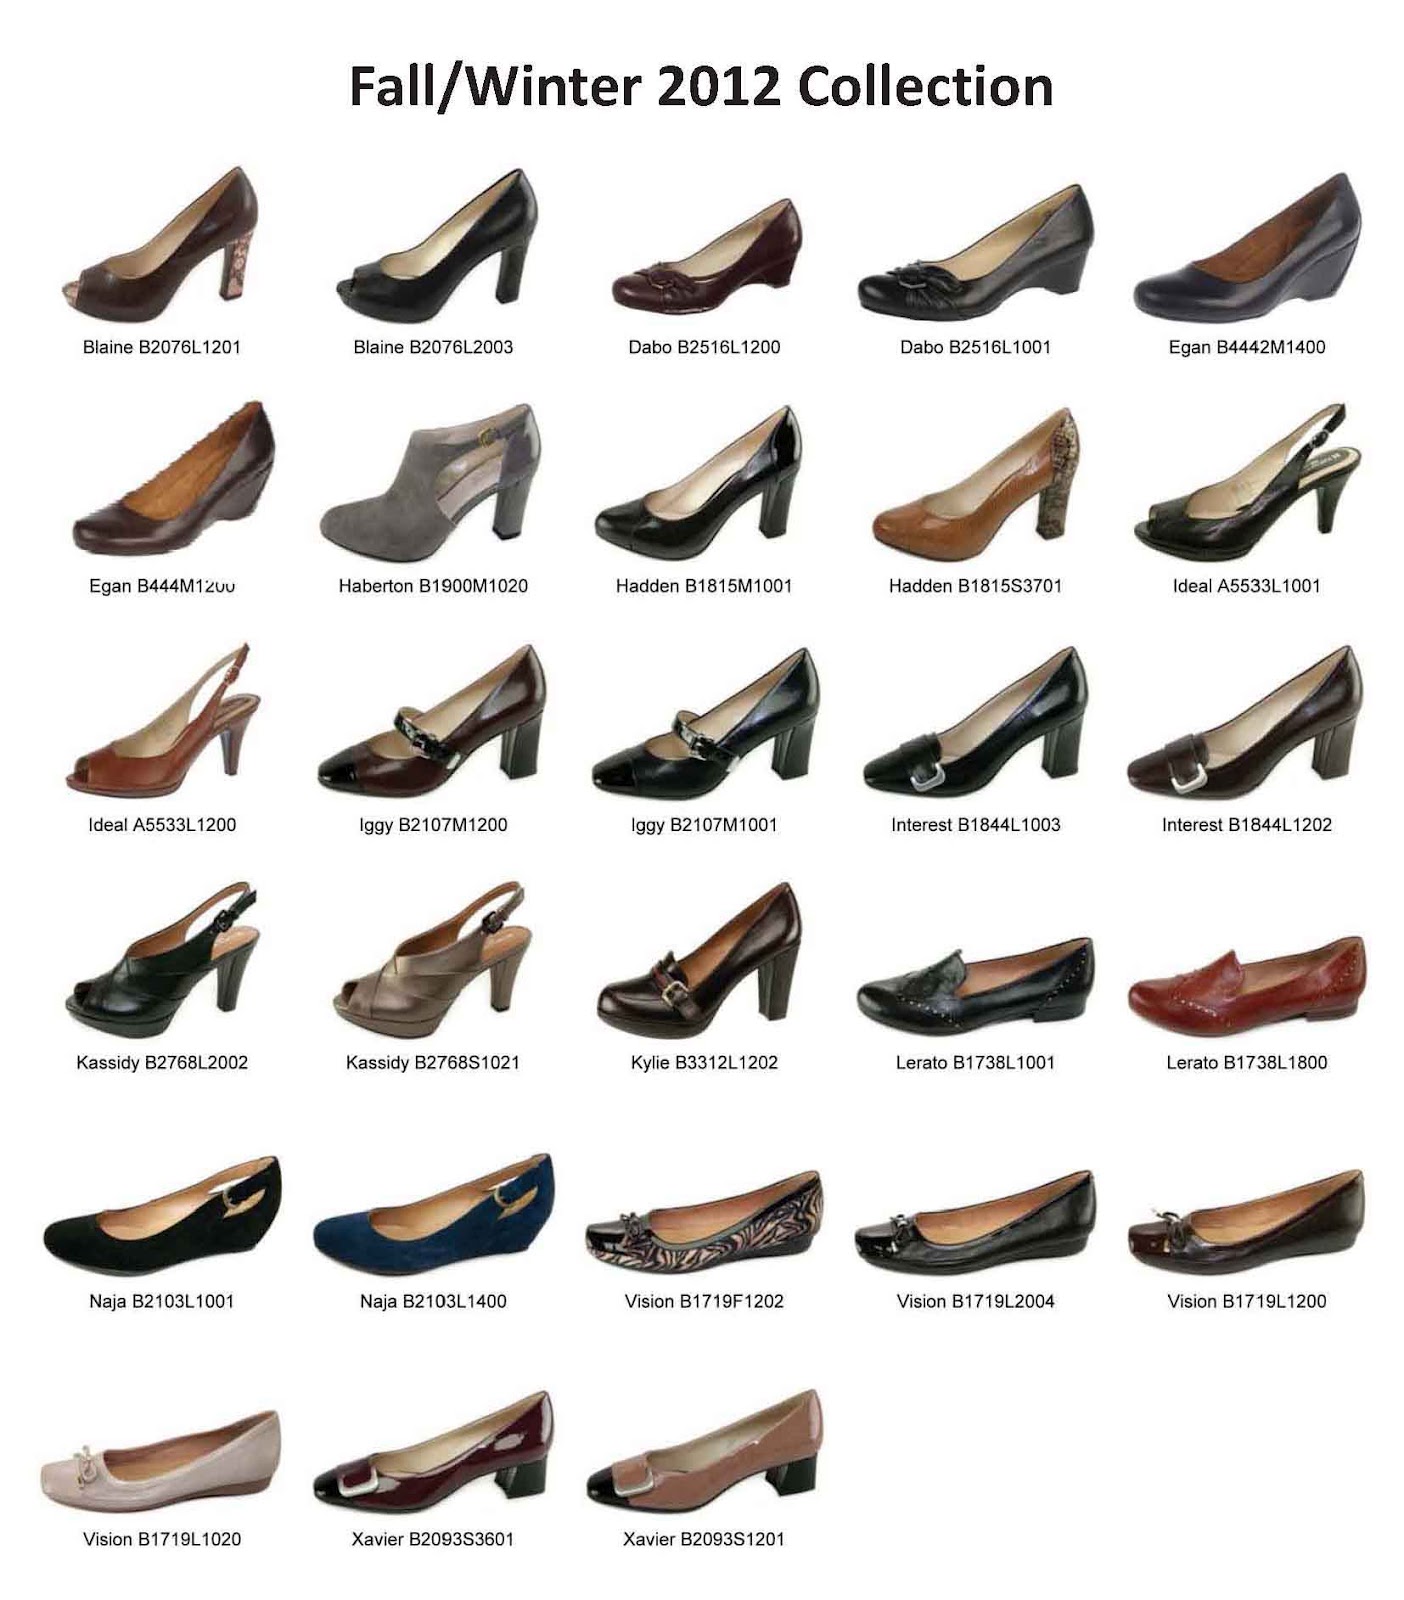 Woman Avenue: Trend Alert: Fall 2012 Collection of Naturalizer® Footwear